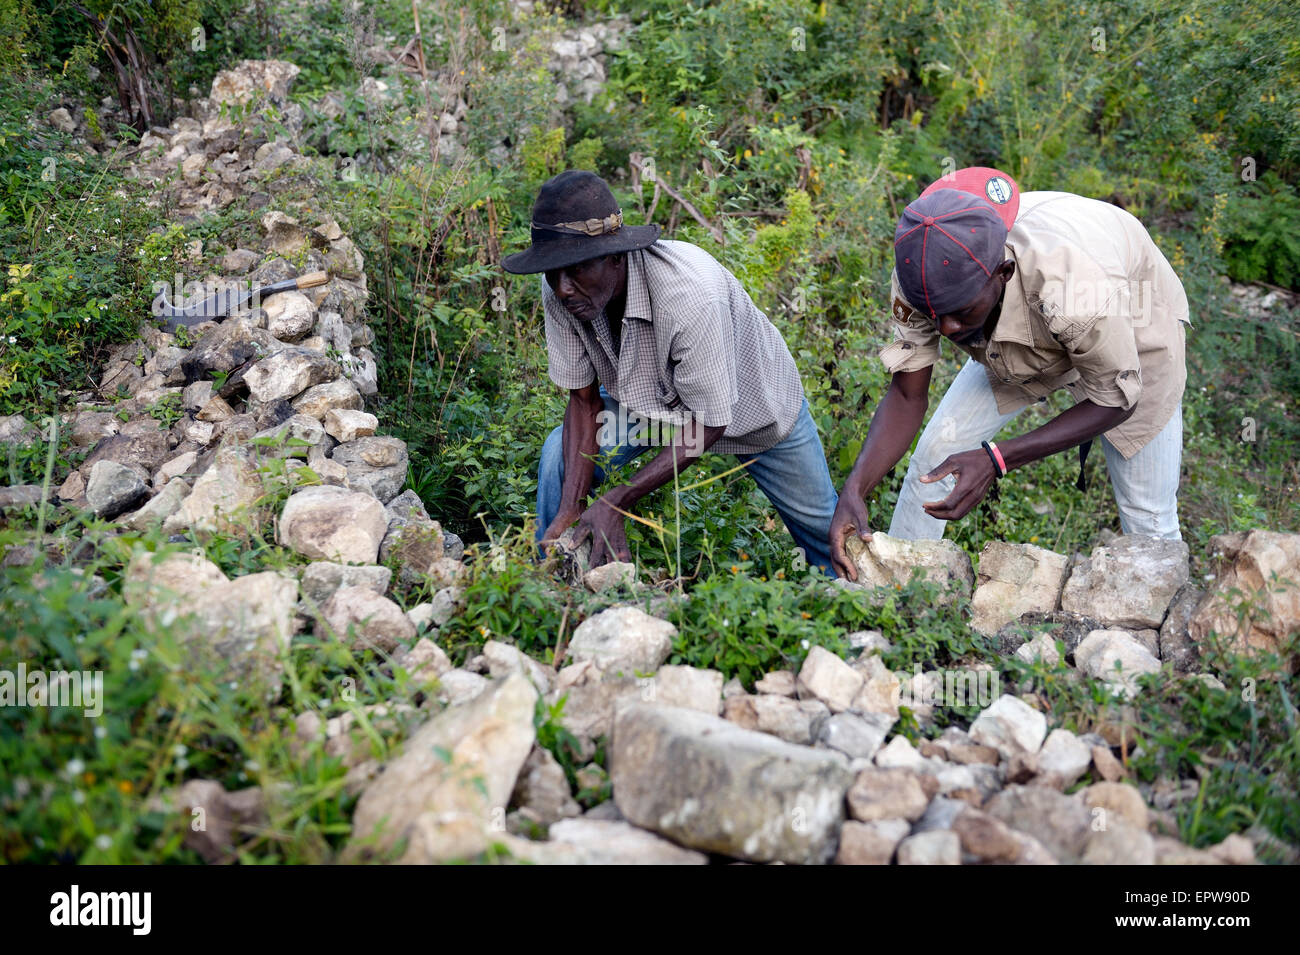 Men building walls with boulders to prevent erosion on deforested slopes, Riviere Froide, Ouest Department, Haiti Stock Photo